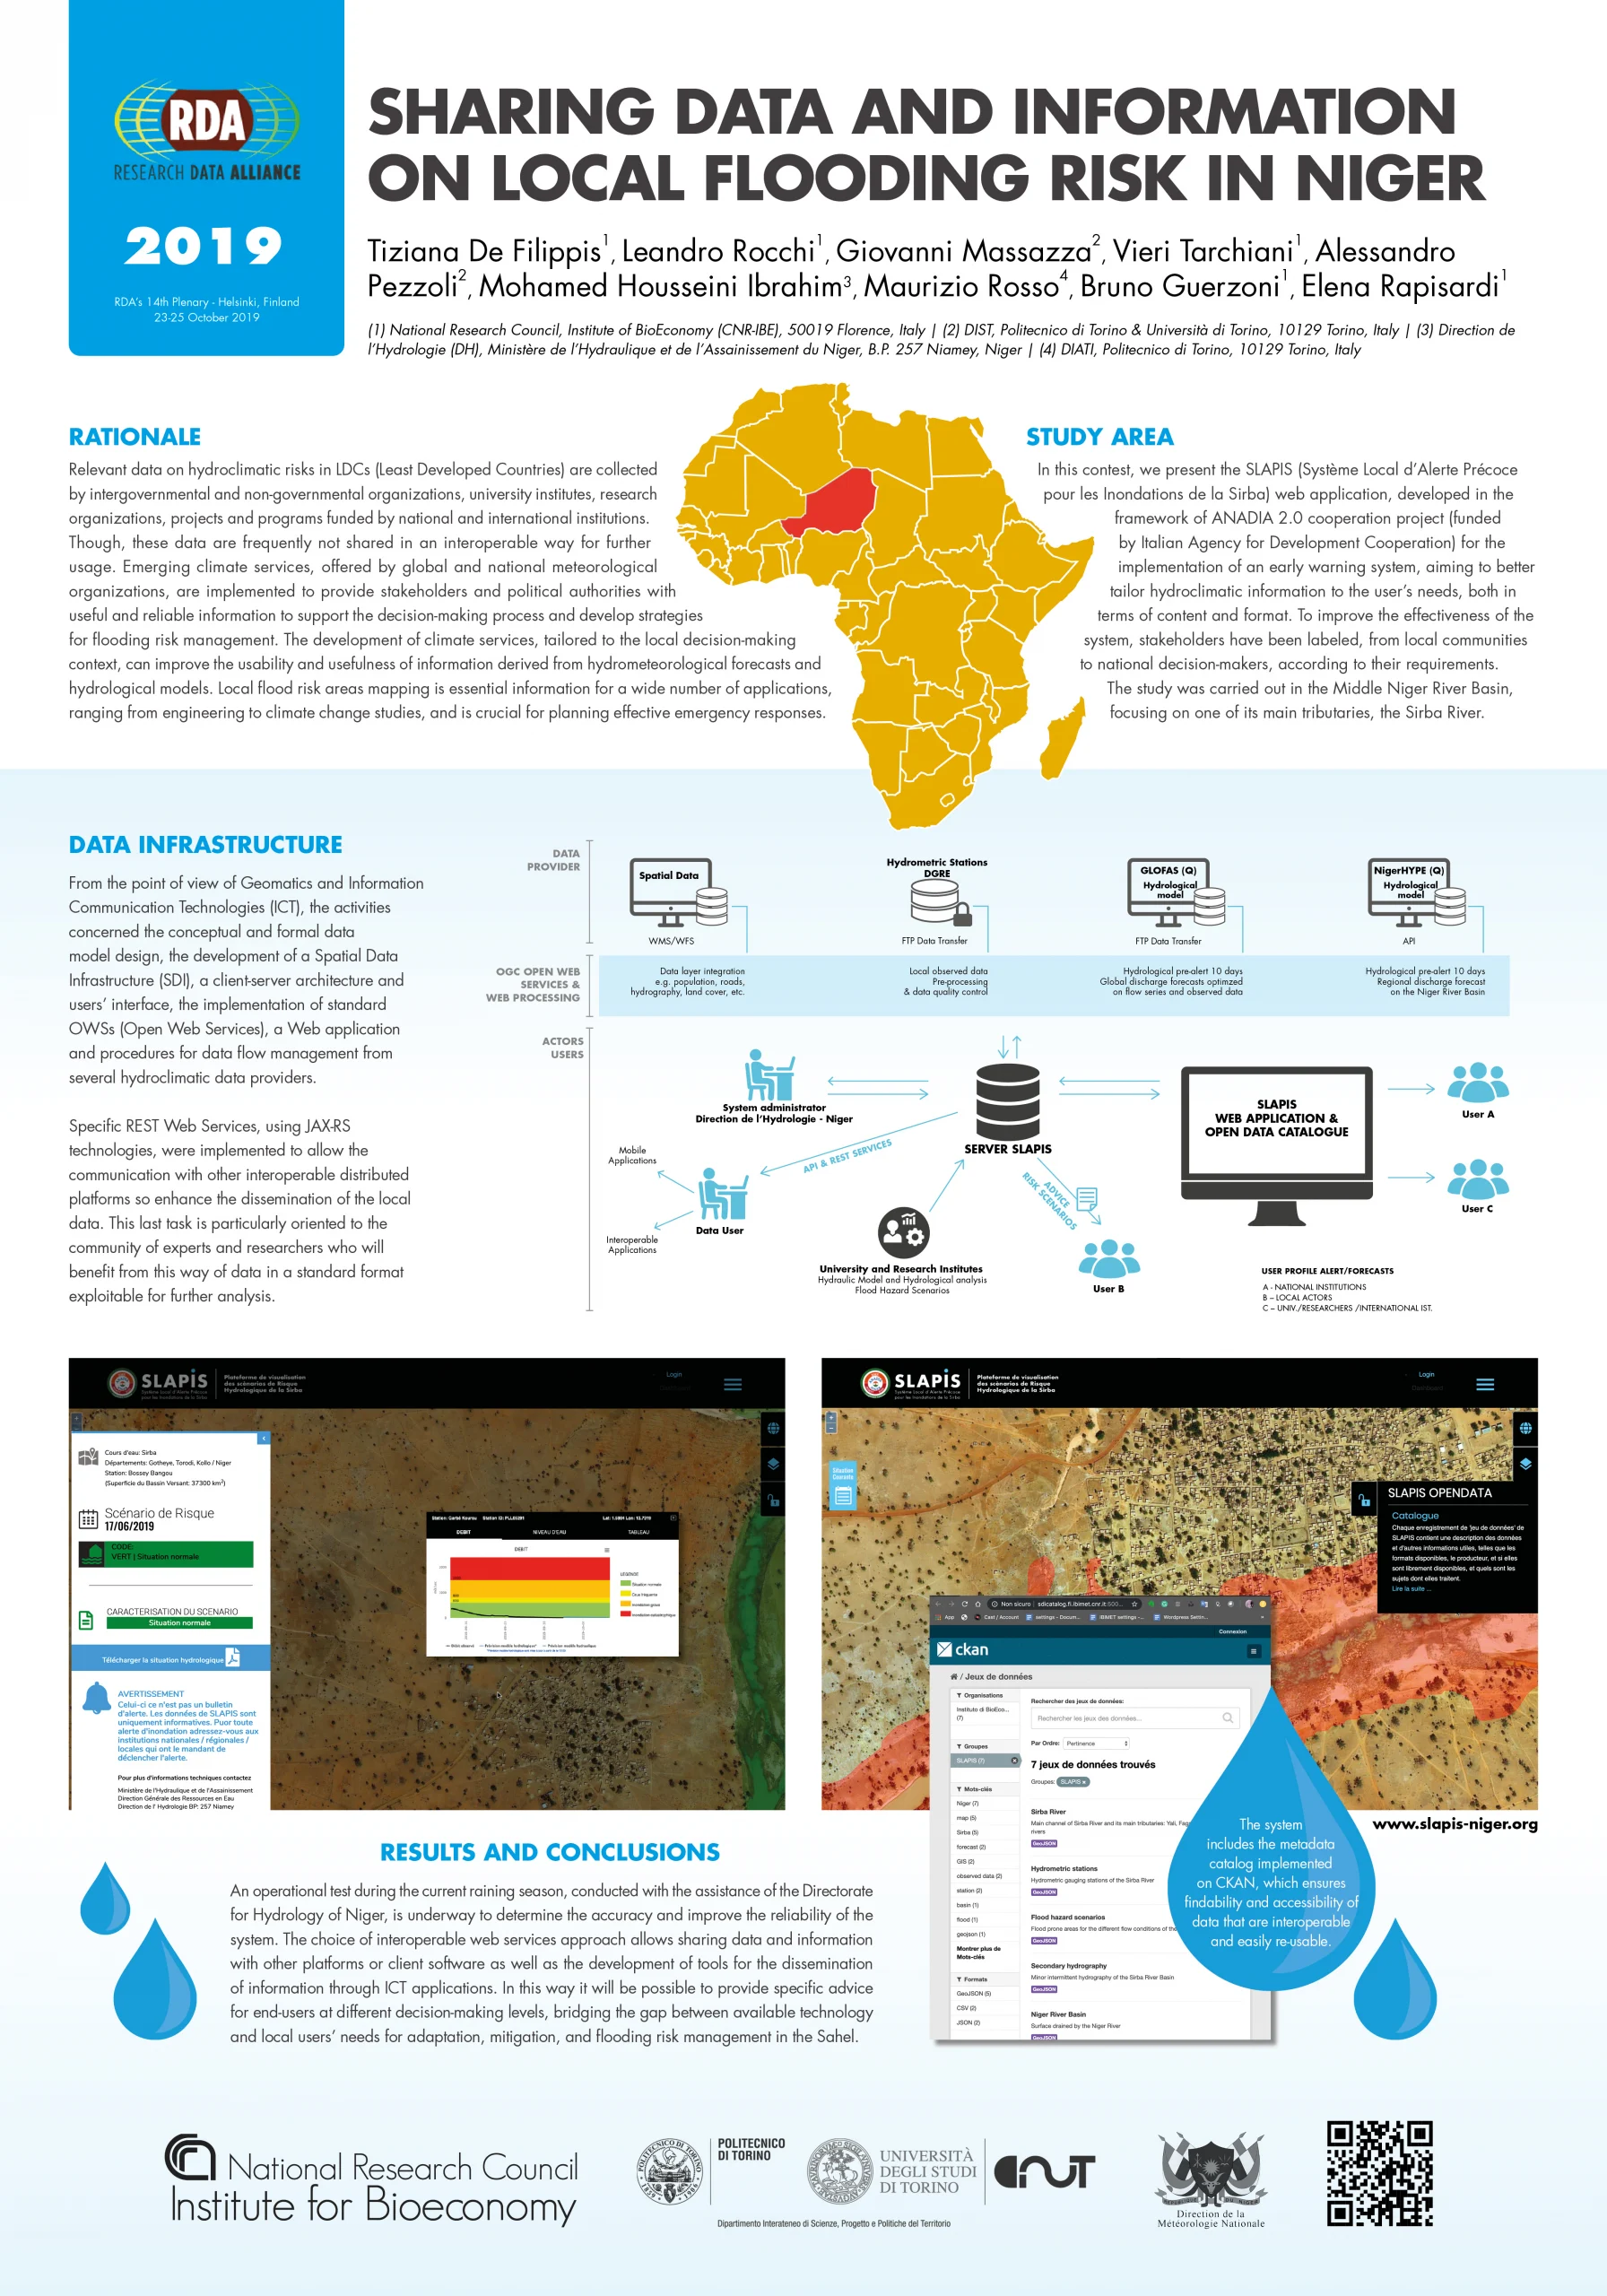 Sharing Data and Information on Local Flooding Risk in Niger